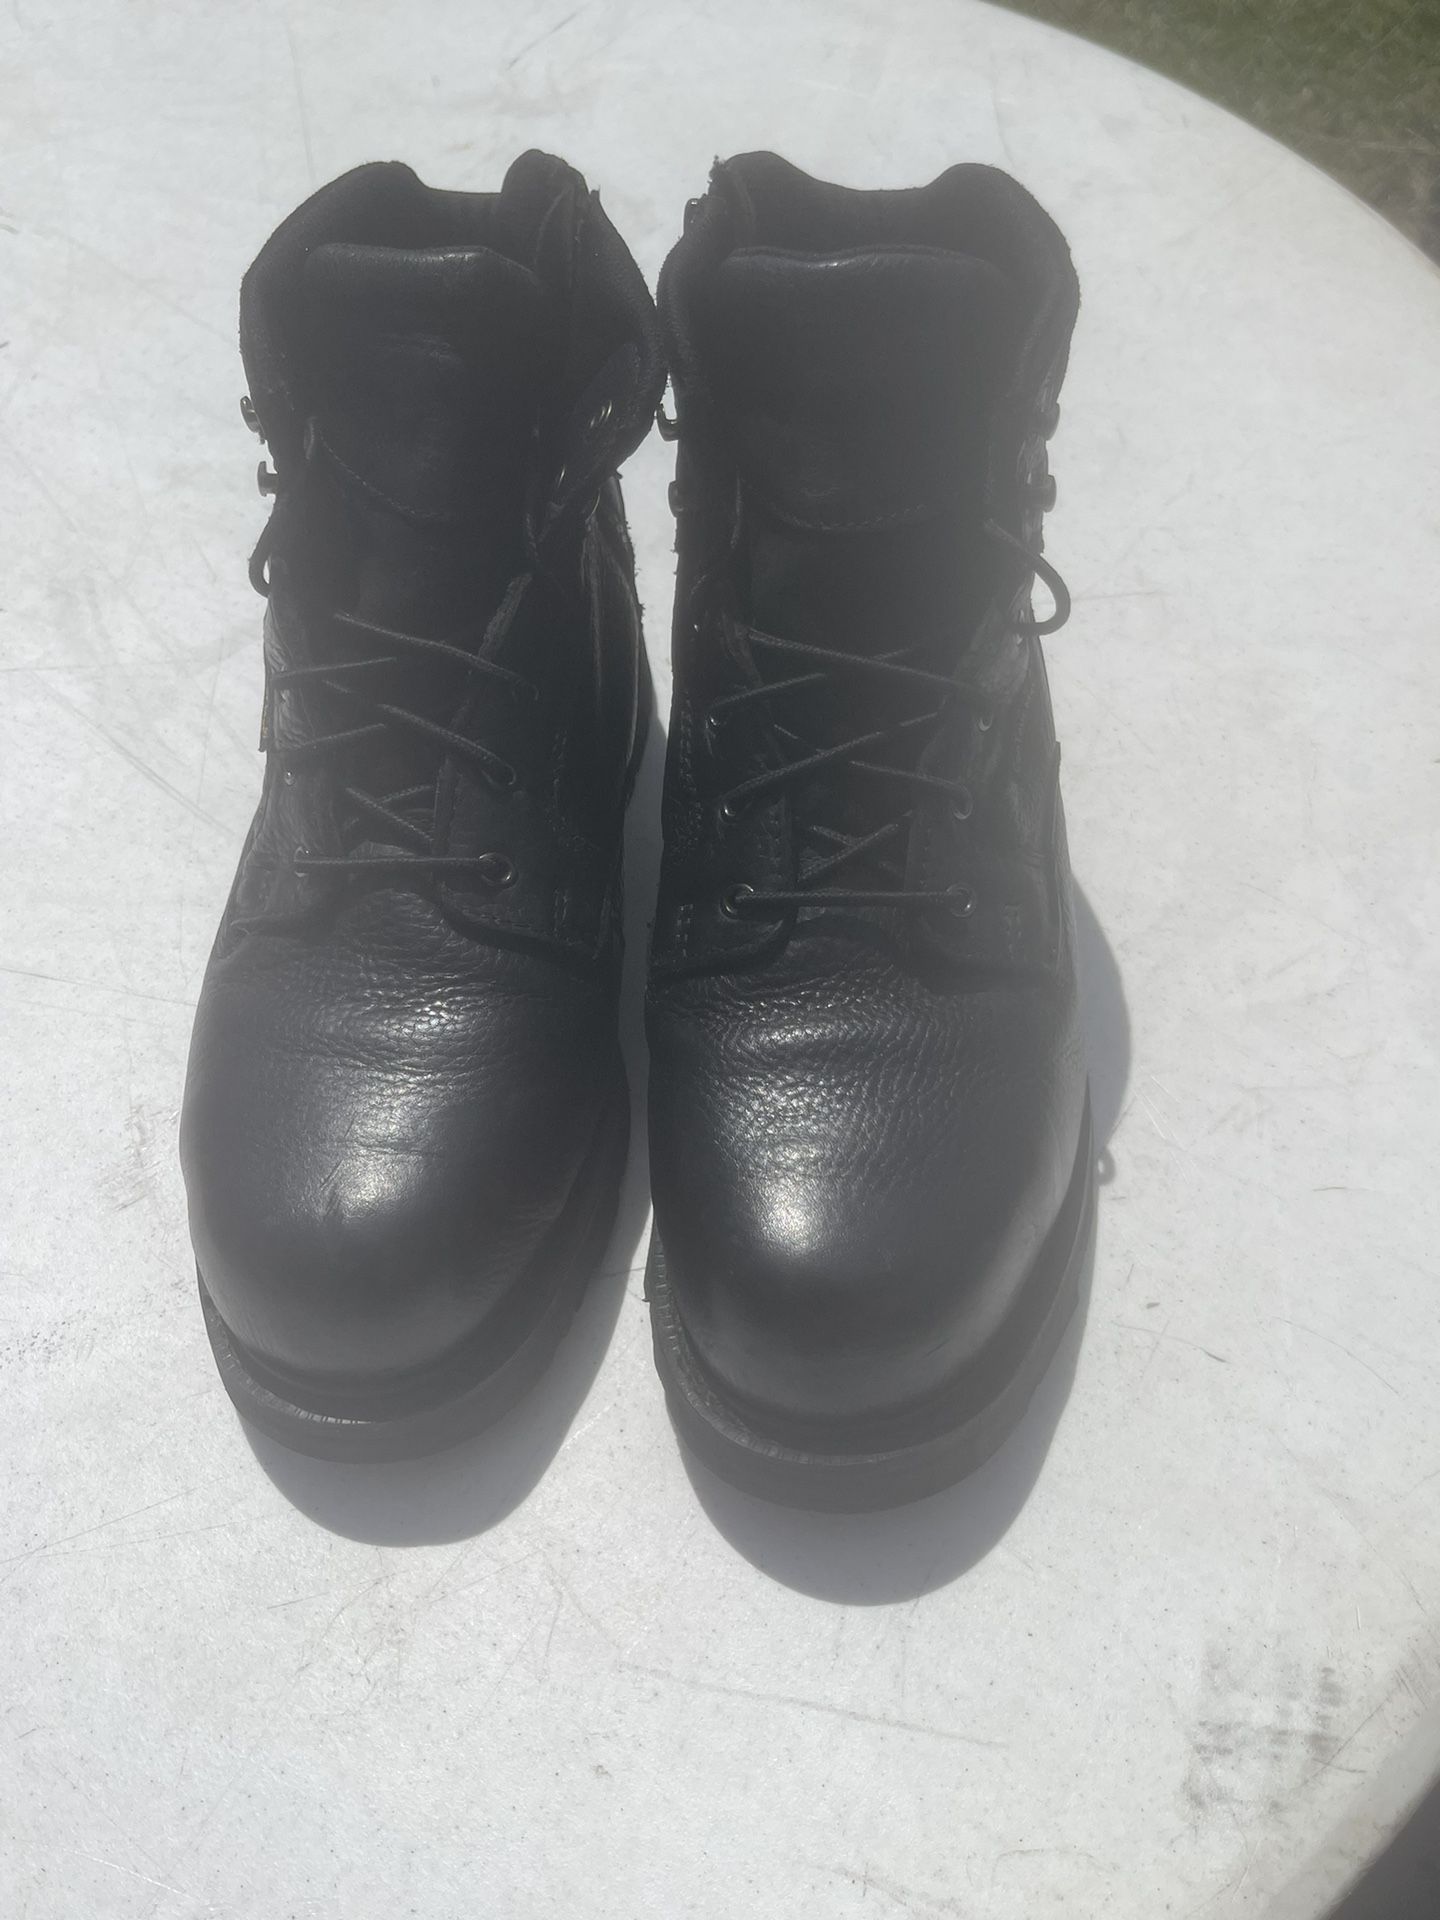 HYTEST men’s size 12 steel to boot black leather